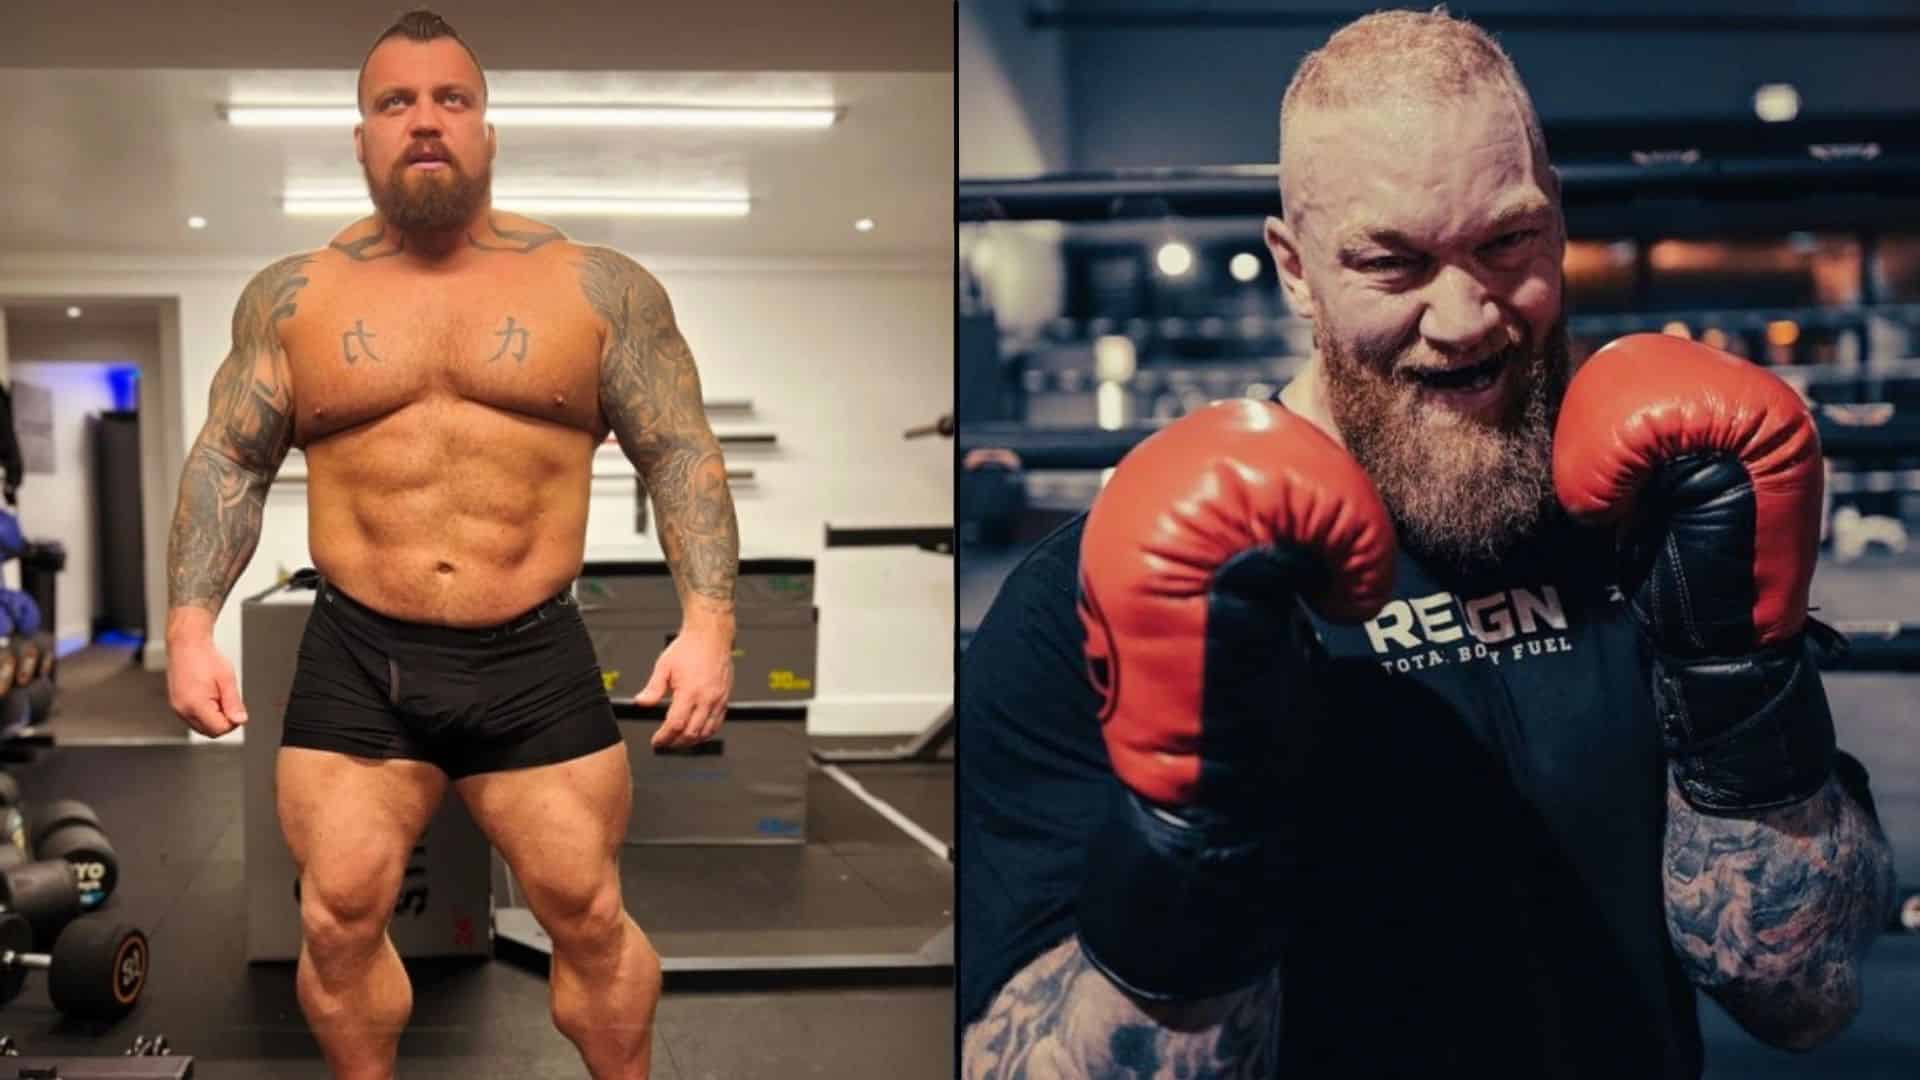 Eddie Hall and The Mountain side by side in the gym